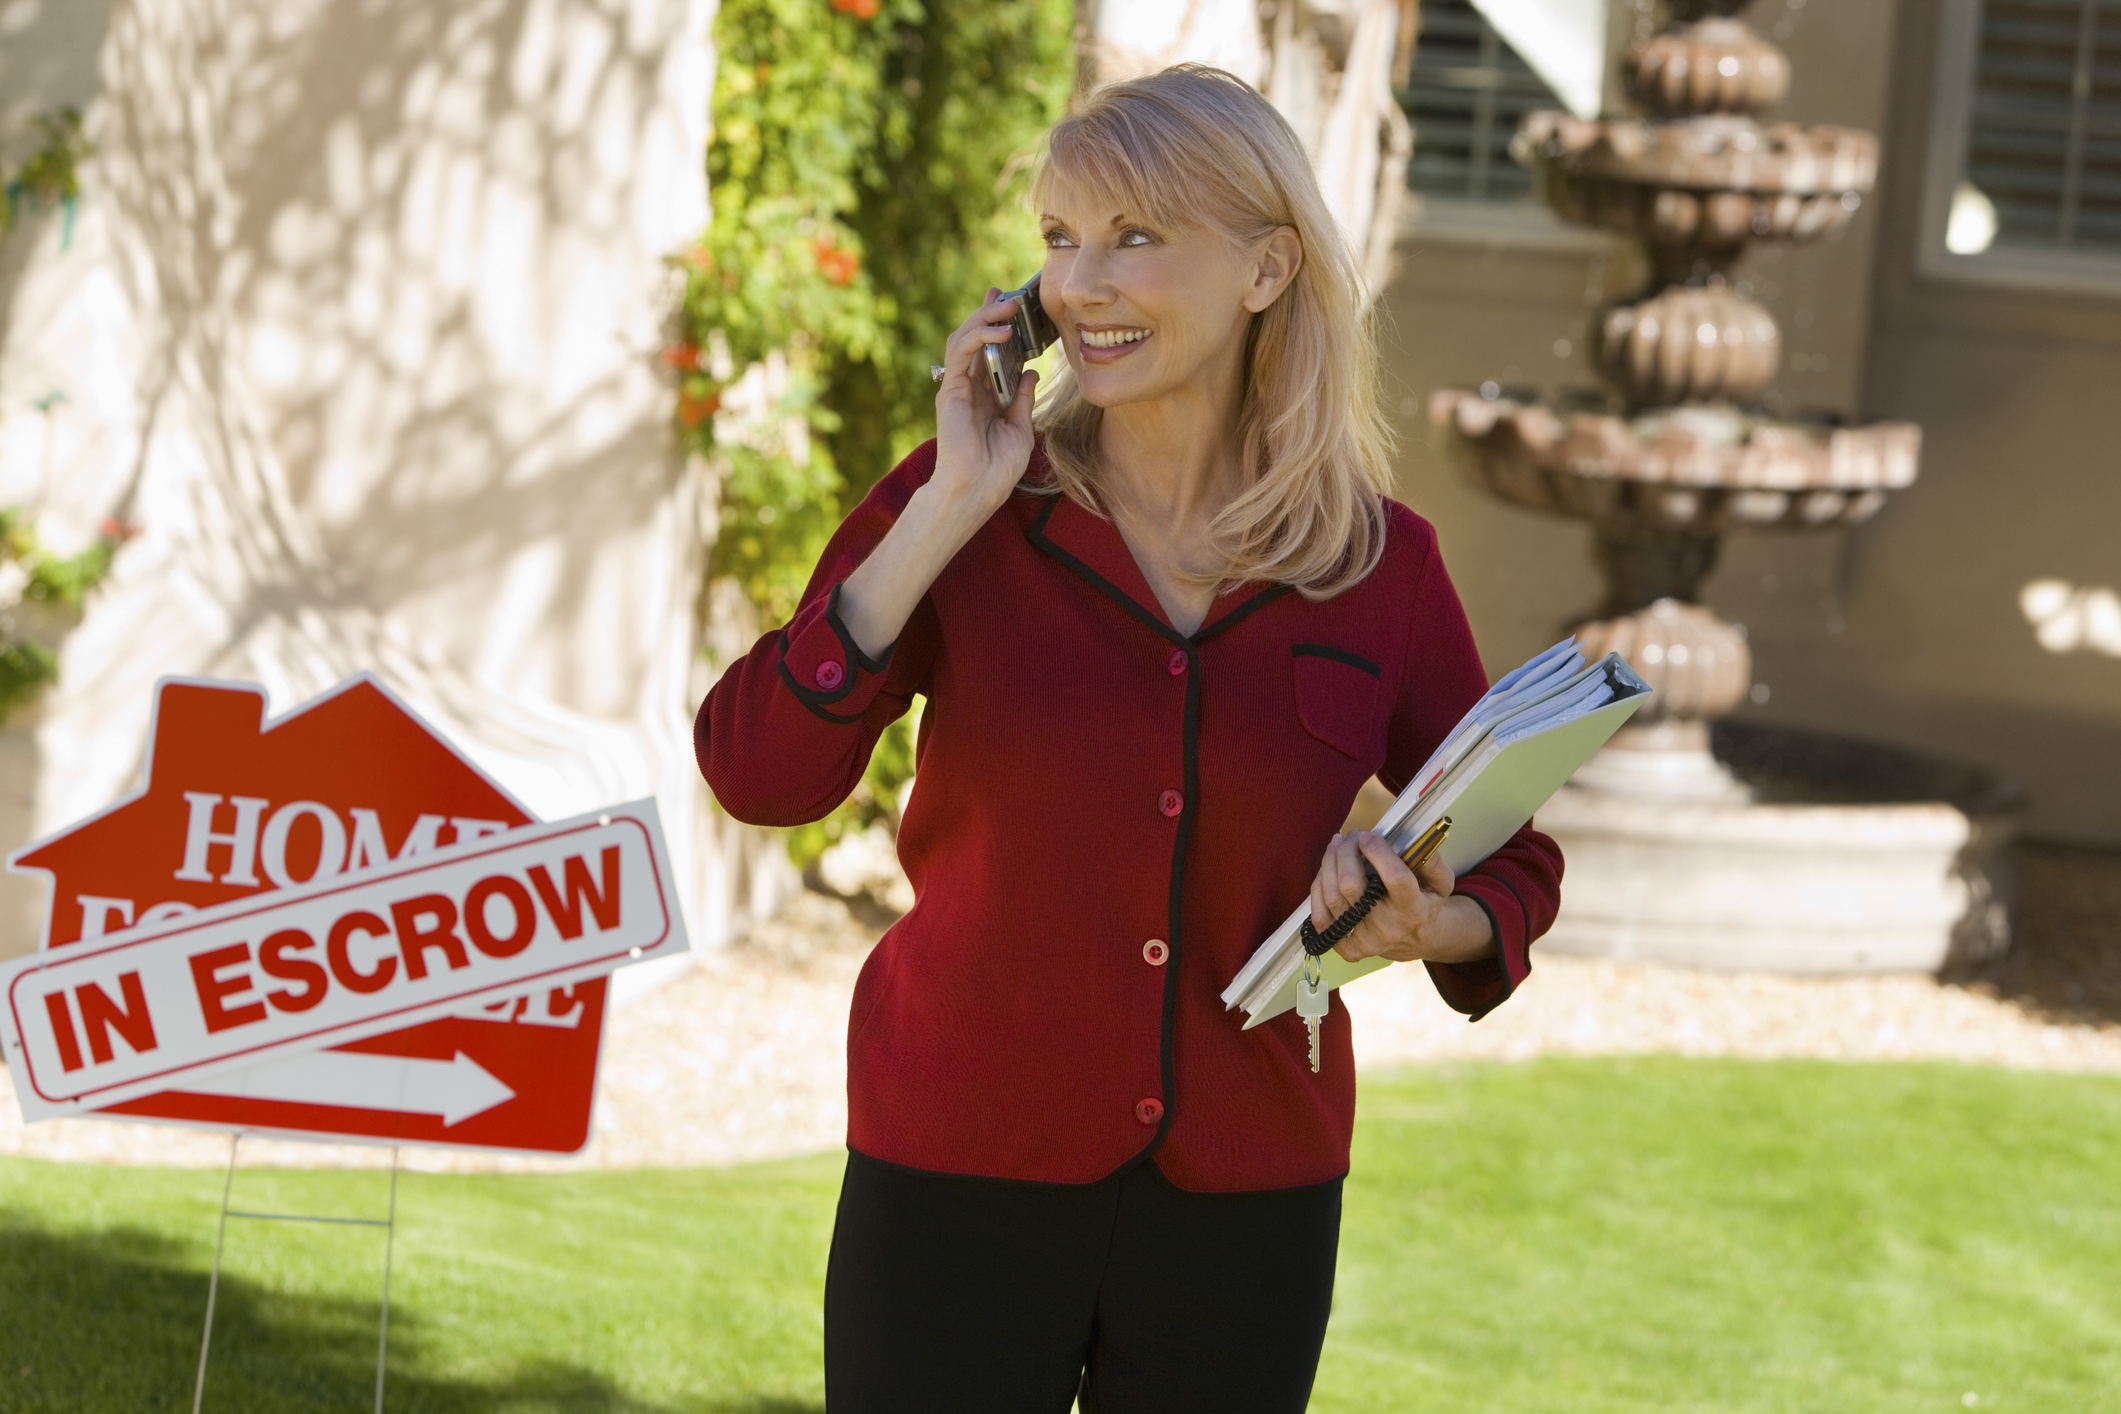 Pay A Visit To The Escrow Company